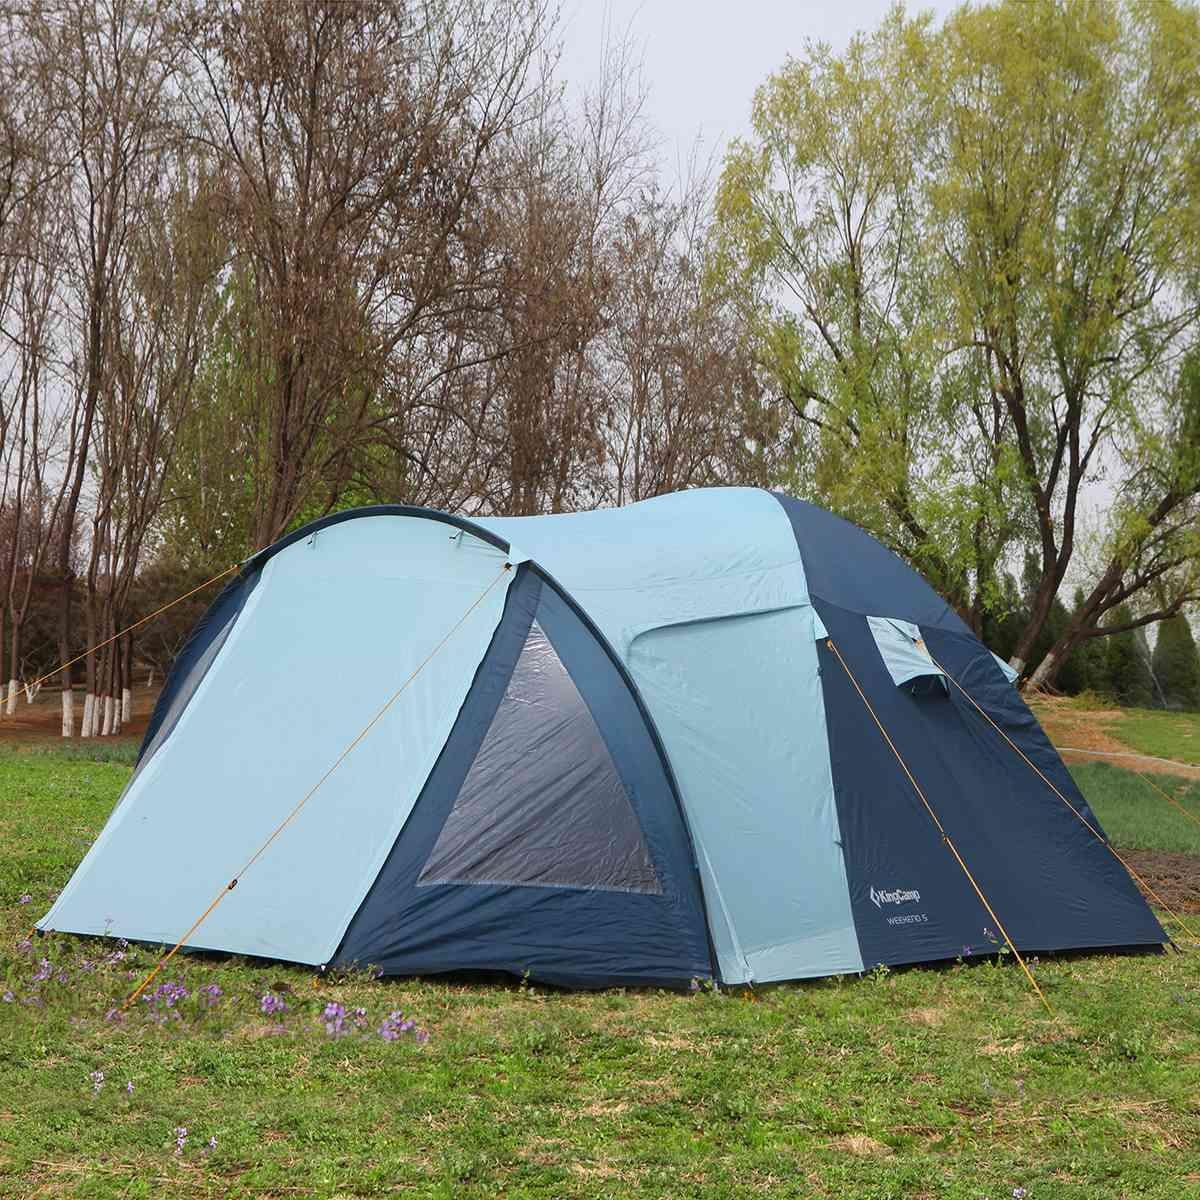 KingCamp Outdoor Tent Family Group Camping 5Person 3 Season Double Layer tents 2